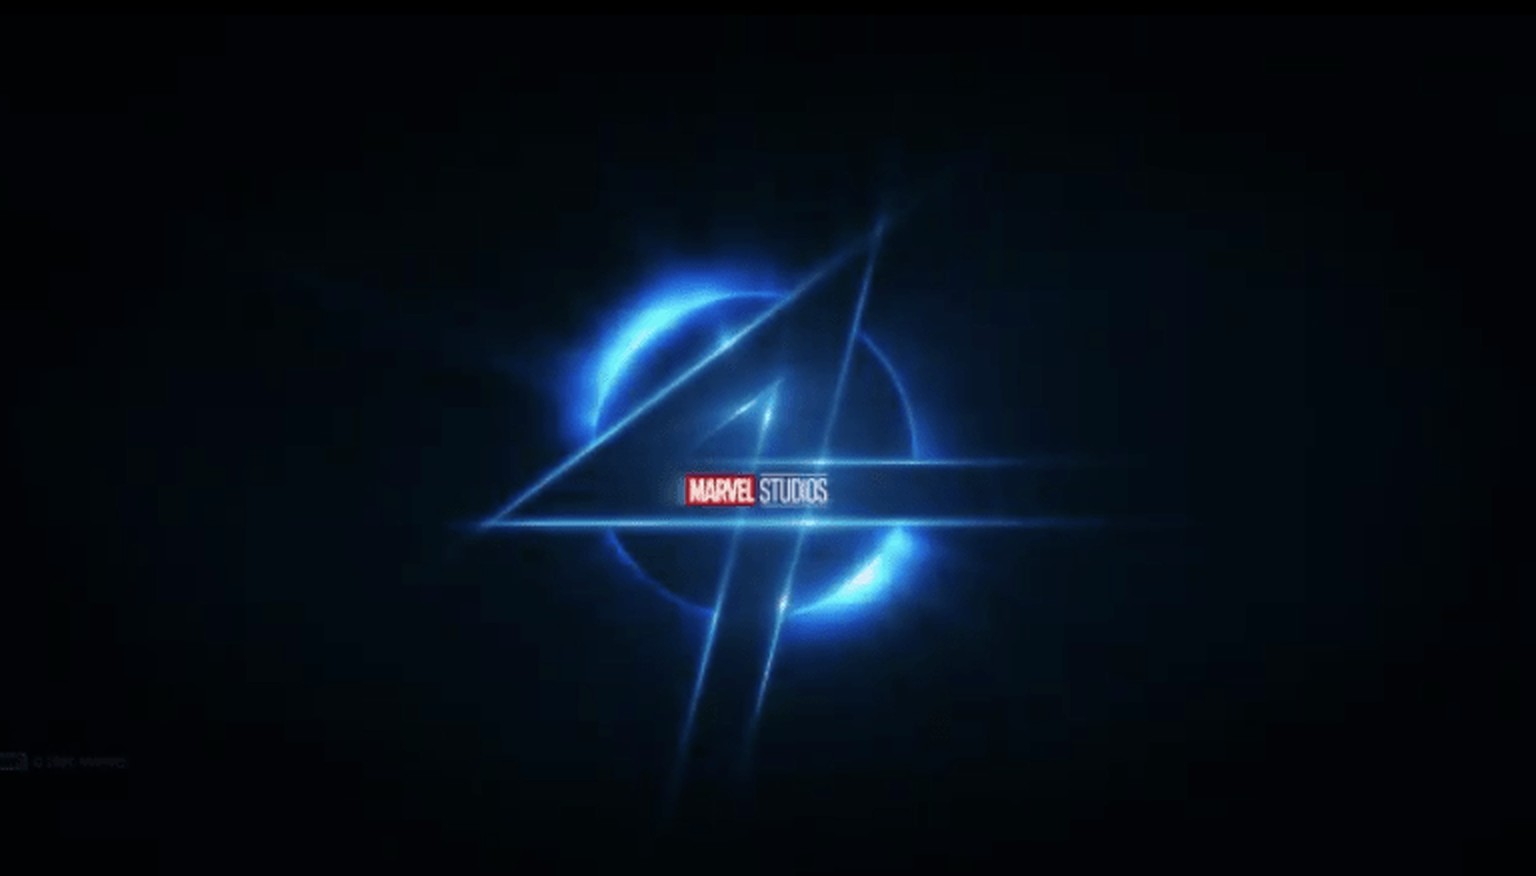 Marvel Studios reveals new Phase 4 films, footage, and release dates